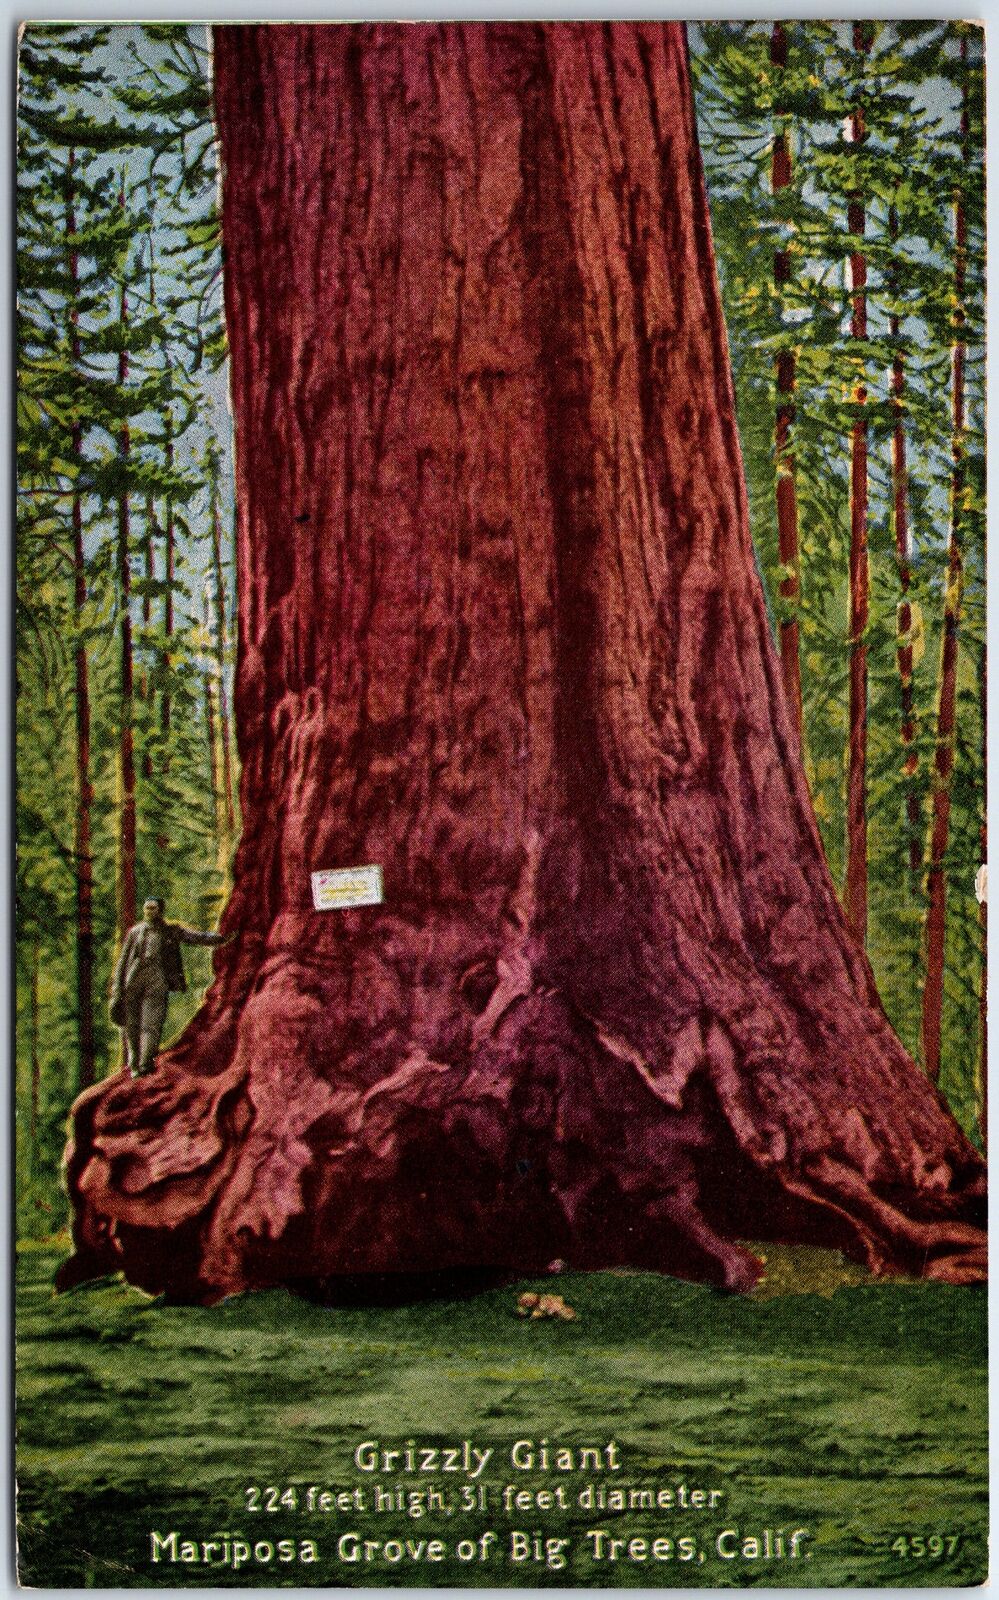 VINTAGE POSTCARD GRIZZLY GIANT AT MARIPOSA CALIFORNIA GROVE OF BIG TREES c. 1910